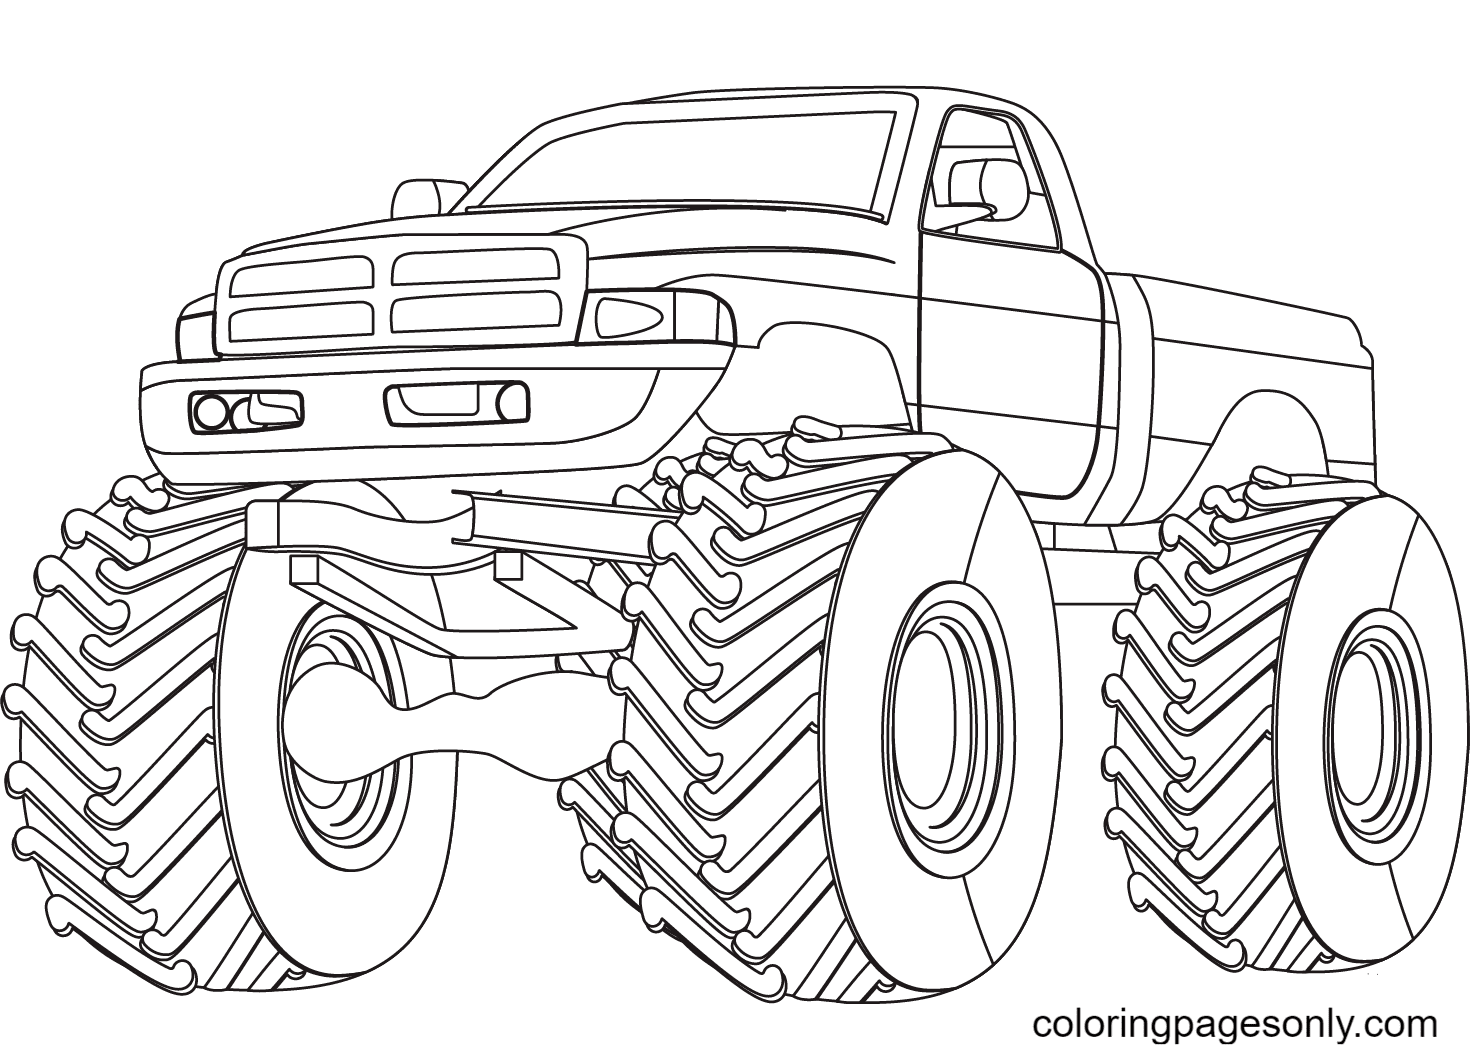 Big wheels monster truck Coloring Page